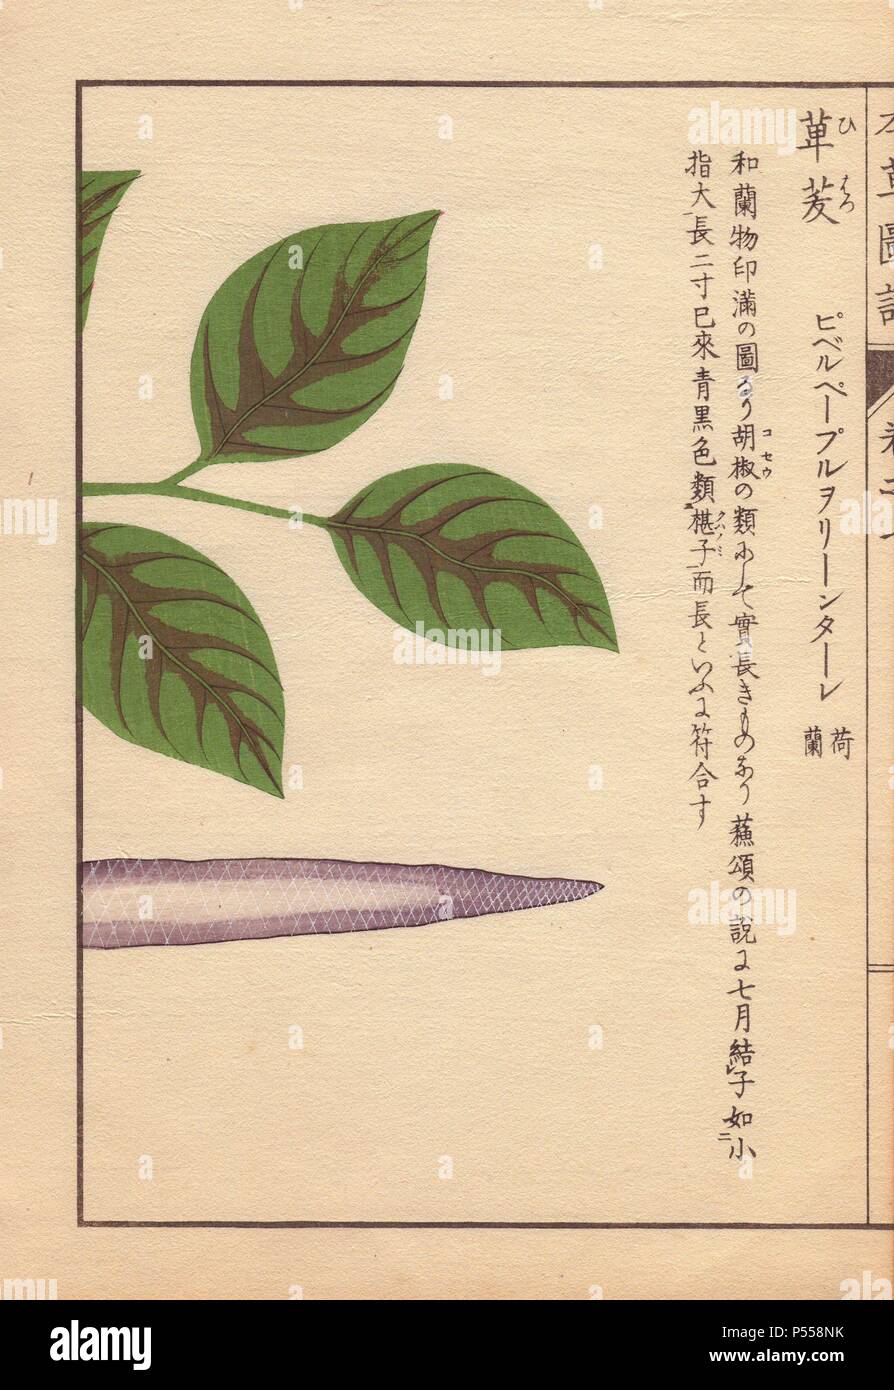 Purple seed and leaves of the long pepper, Piper longum, hihatsu.. Colour-printed woodblock engraving by Kan'en Iwasaki from 'Honzo Zufu,' an Illustrated Guide to Medicinal Plants, 1884. Iwasaki (1786-1842) was a Japanese botanist, entomologist and zoologist. He was one of the first Japanese botanists to incorporate western knowledge into his studies. Stock Photo